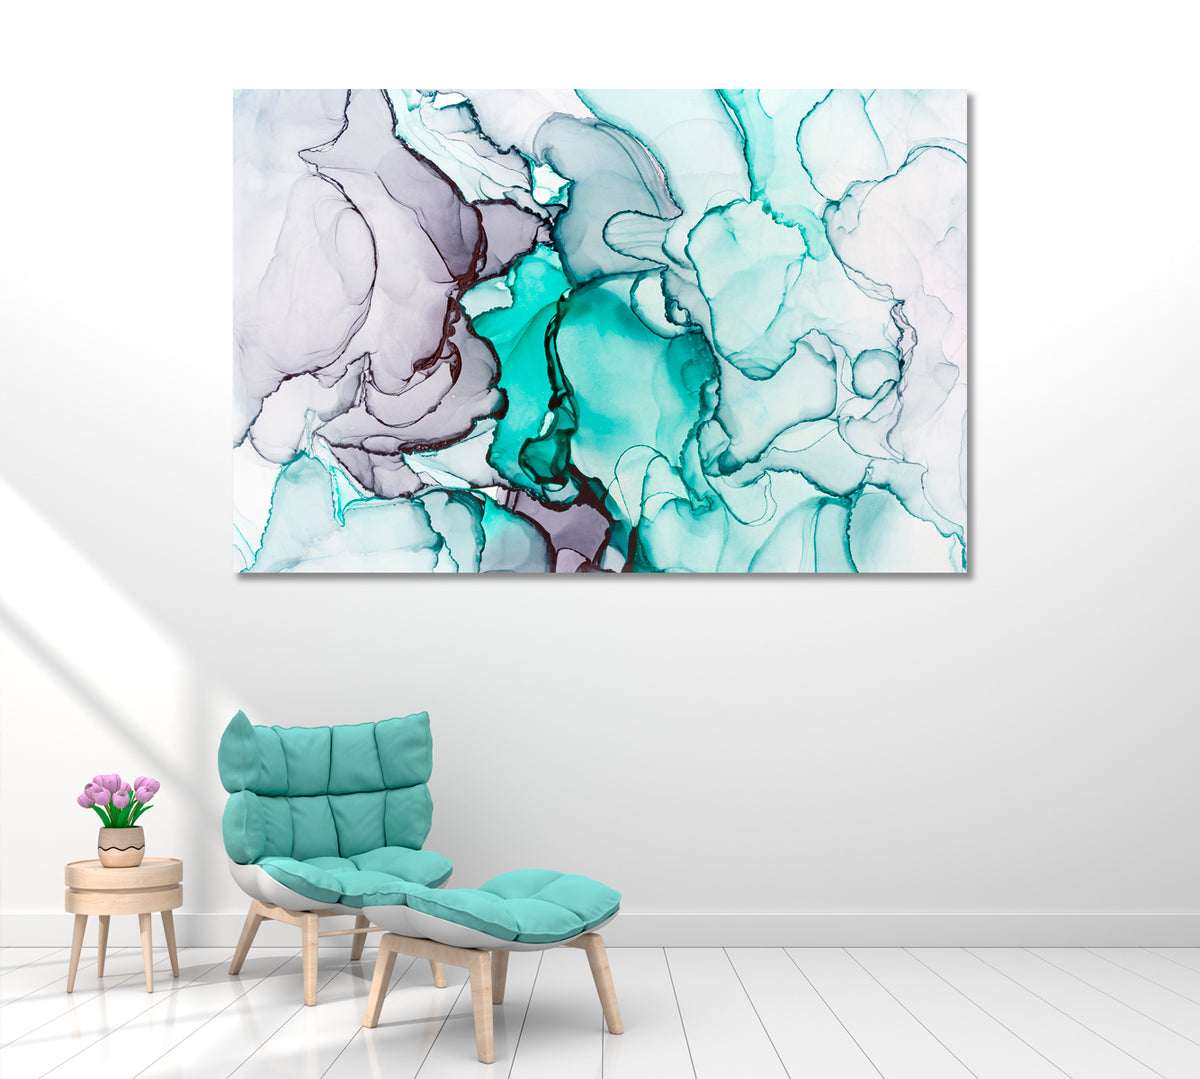 Abstract Mixed Turquoise and Grey Ink Canvas Print ArtLexy 1 Panel 24"x16" inches 